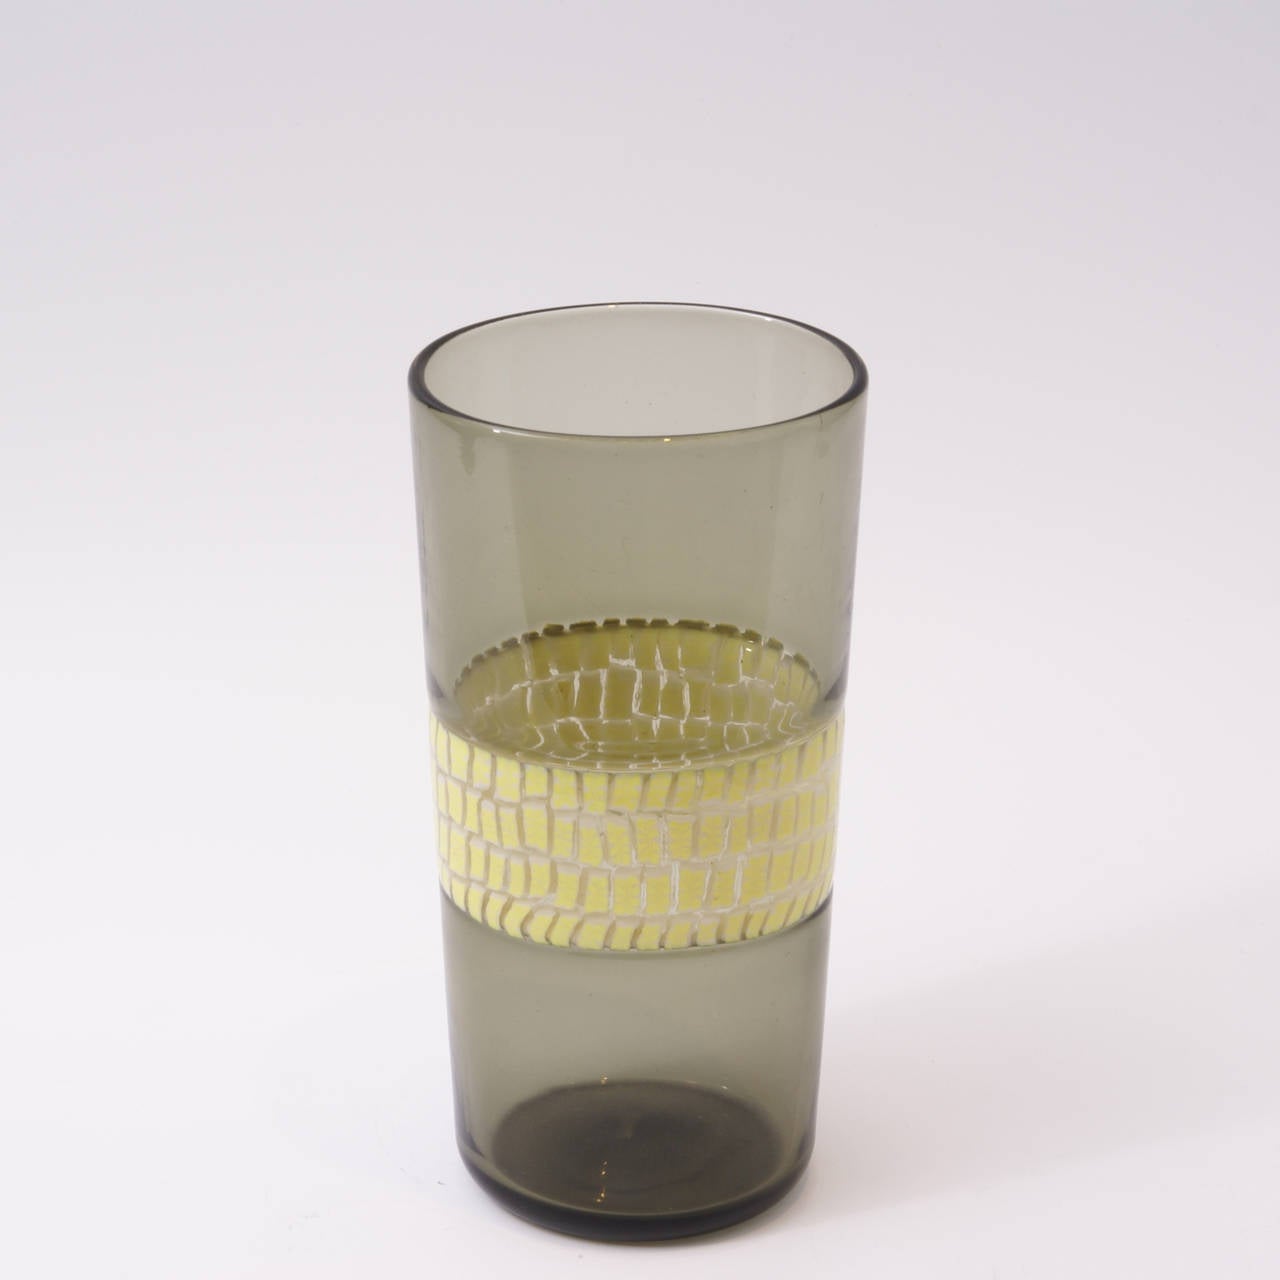 Light brown glass vase with yellow 